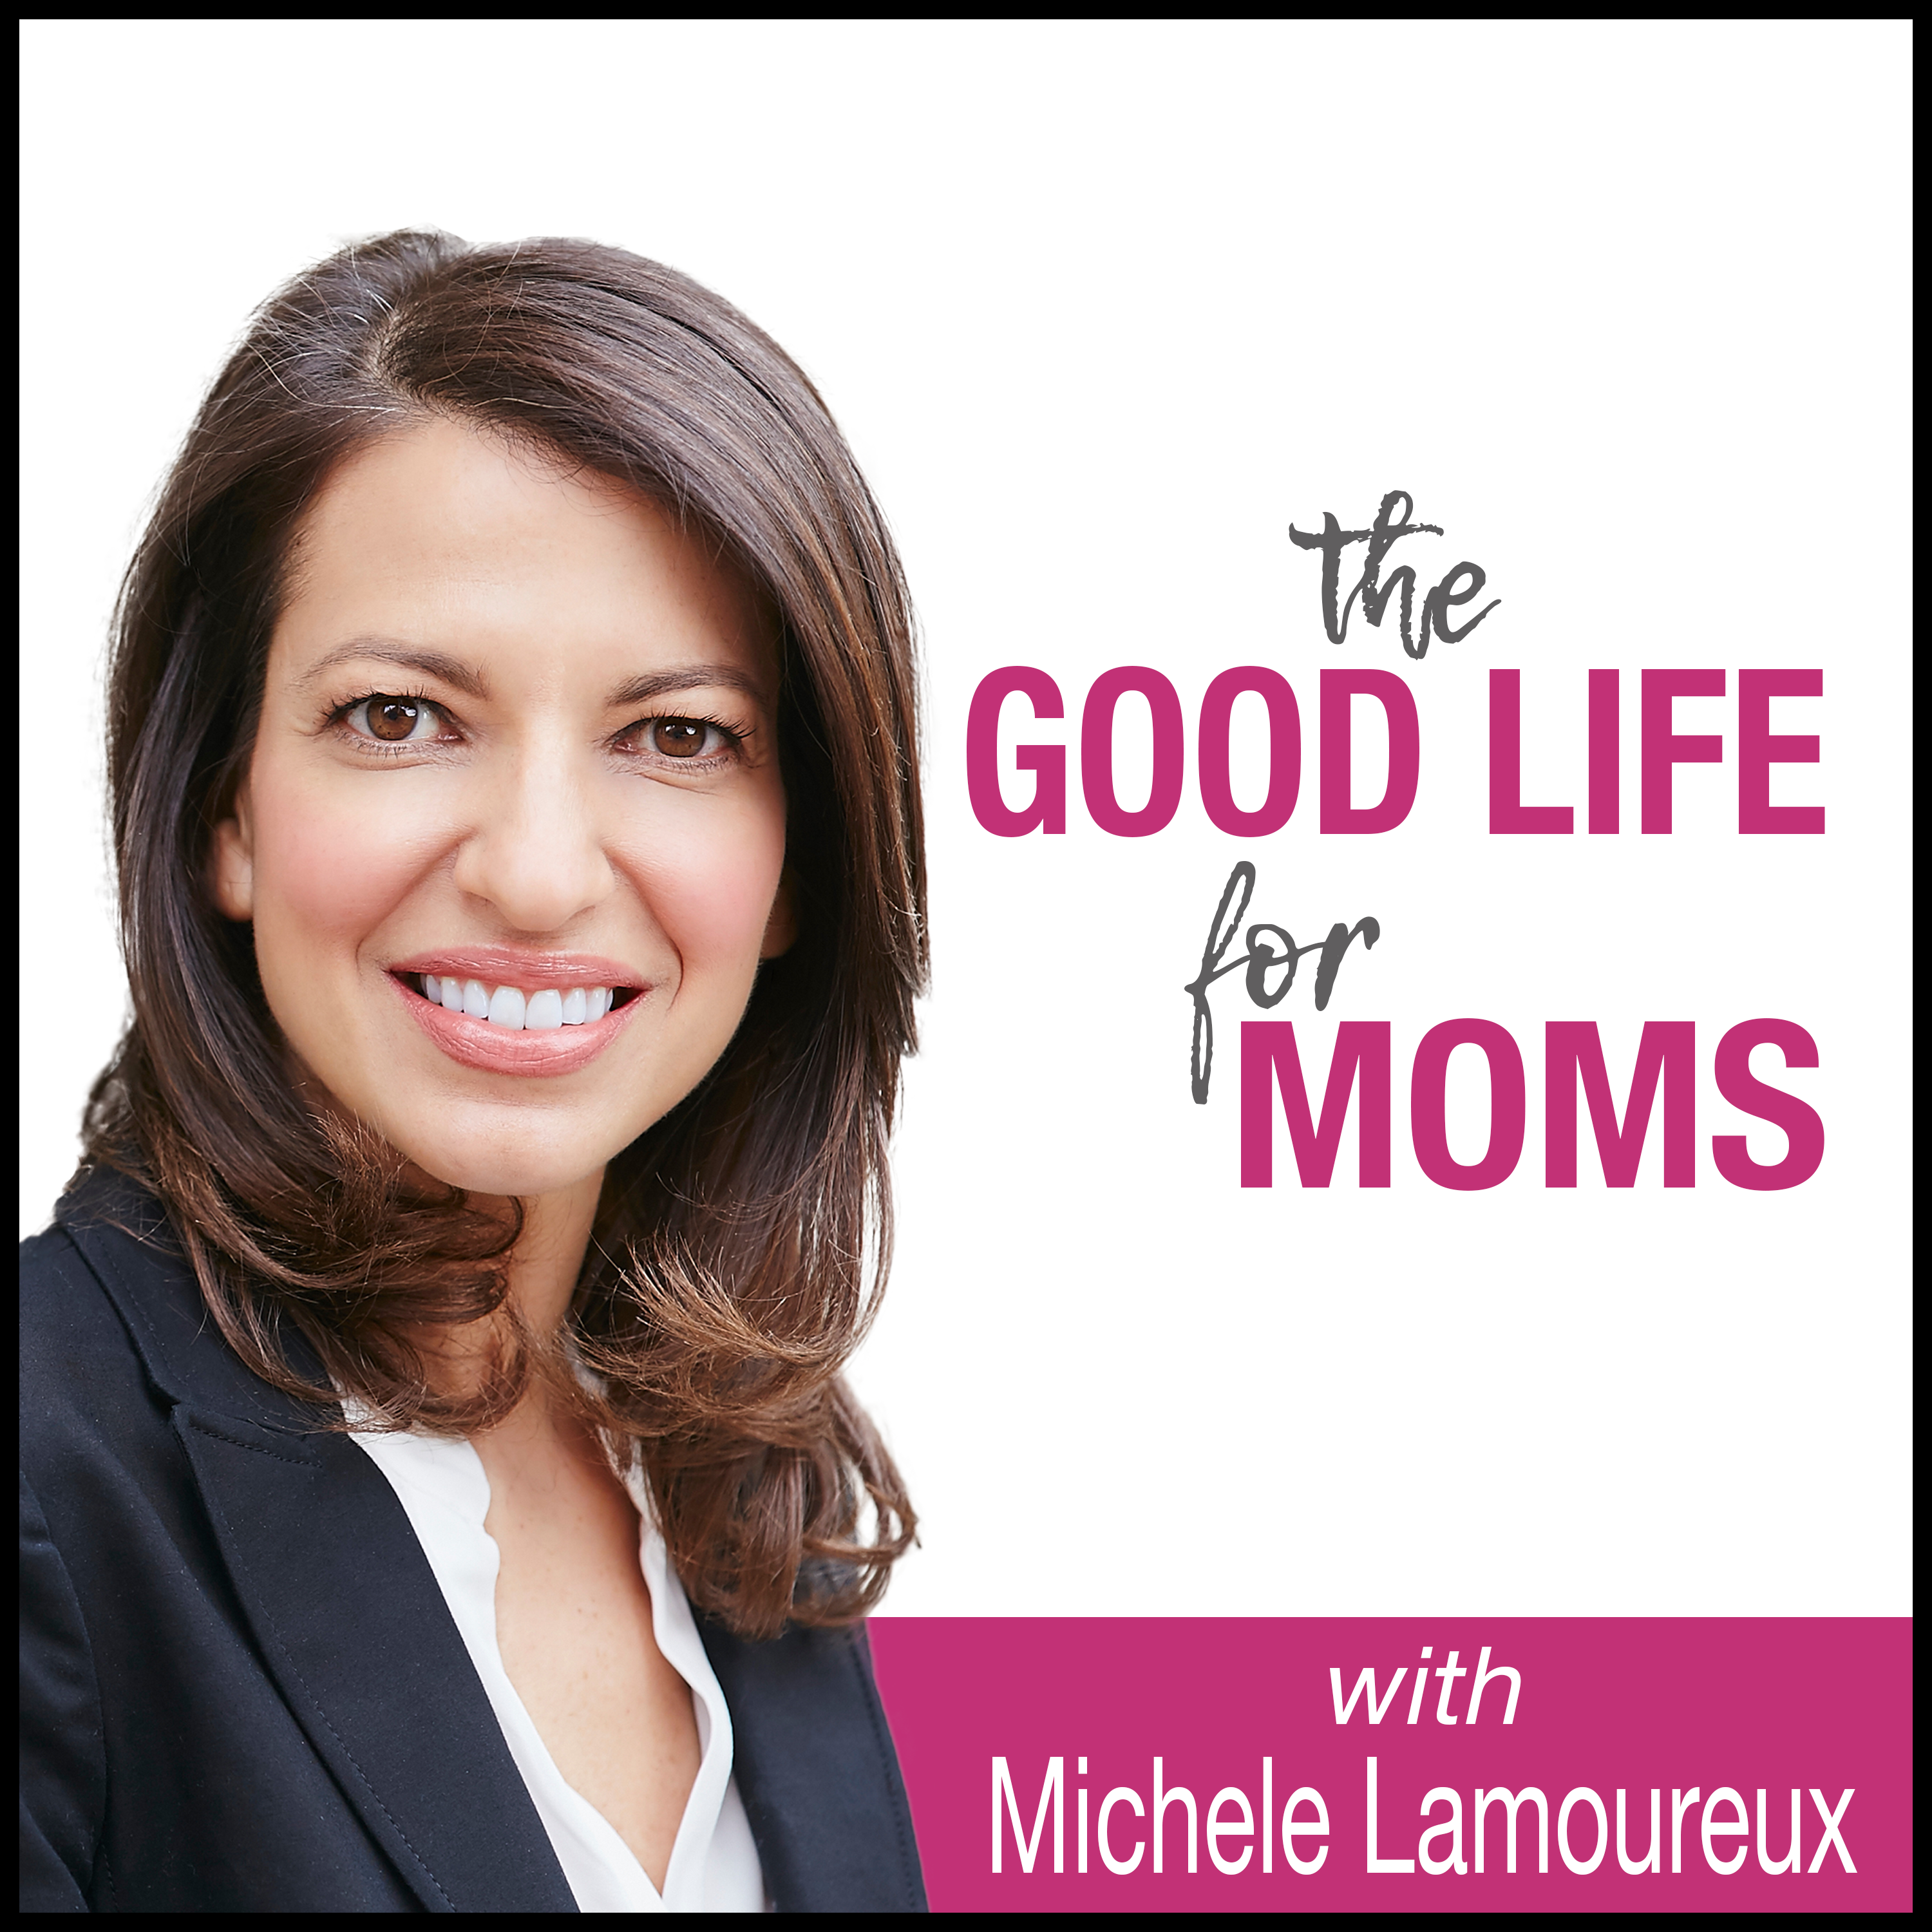 The Good Life for Moms